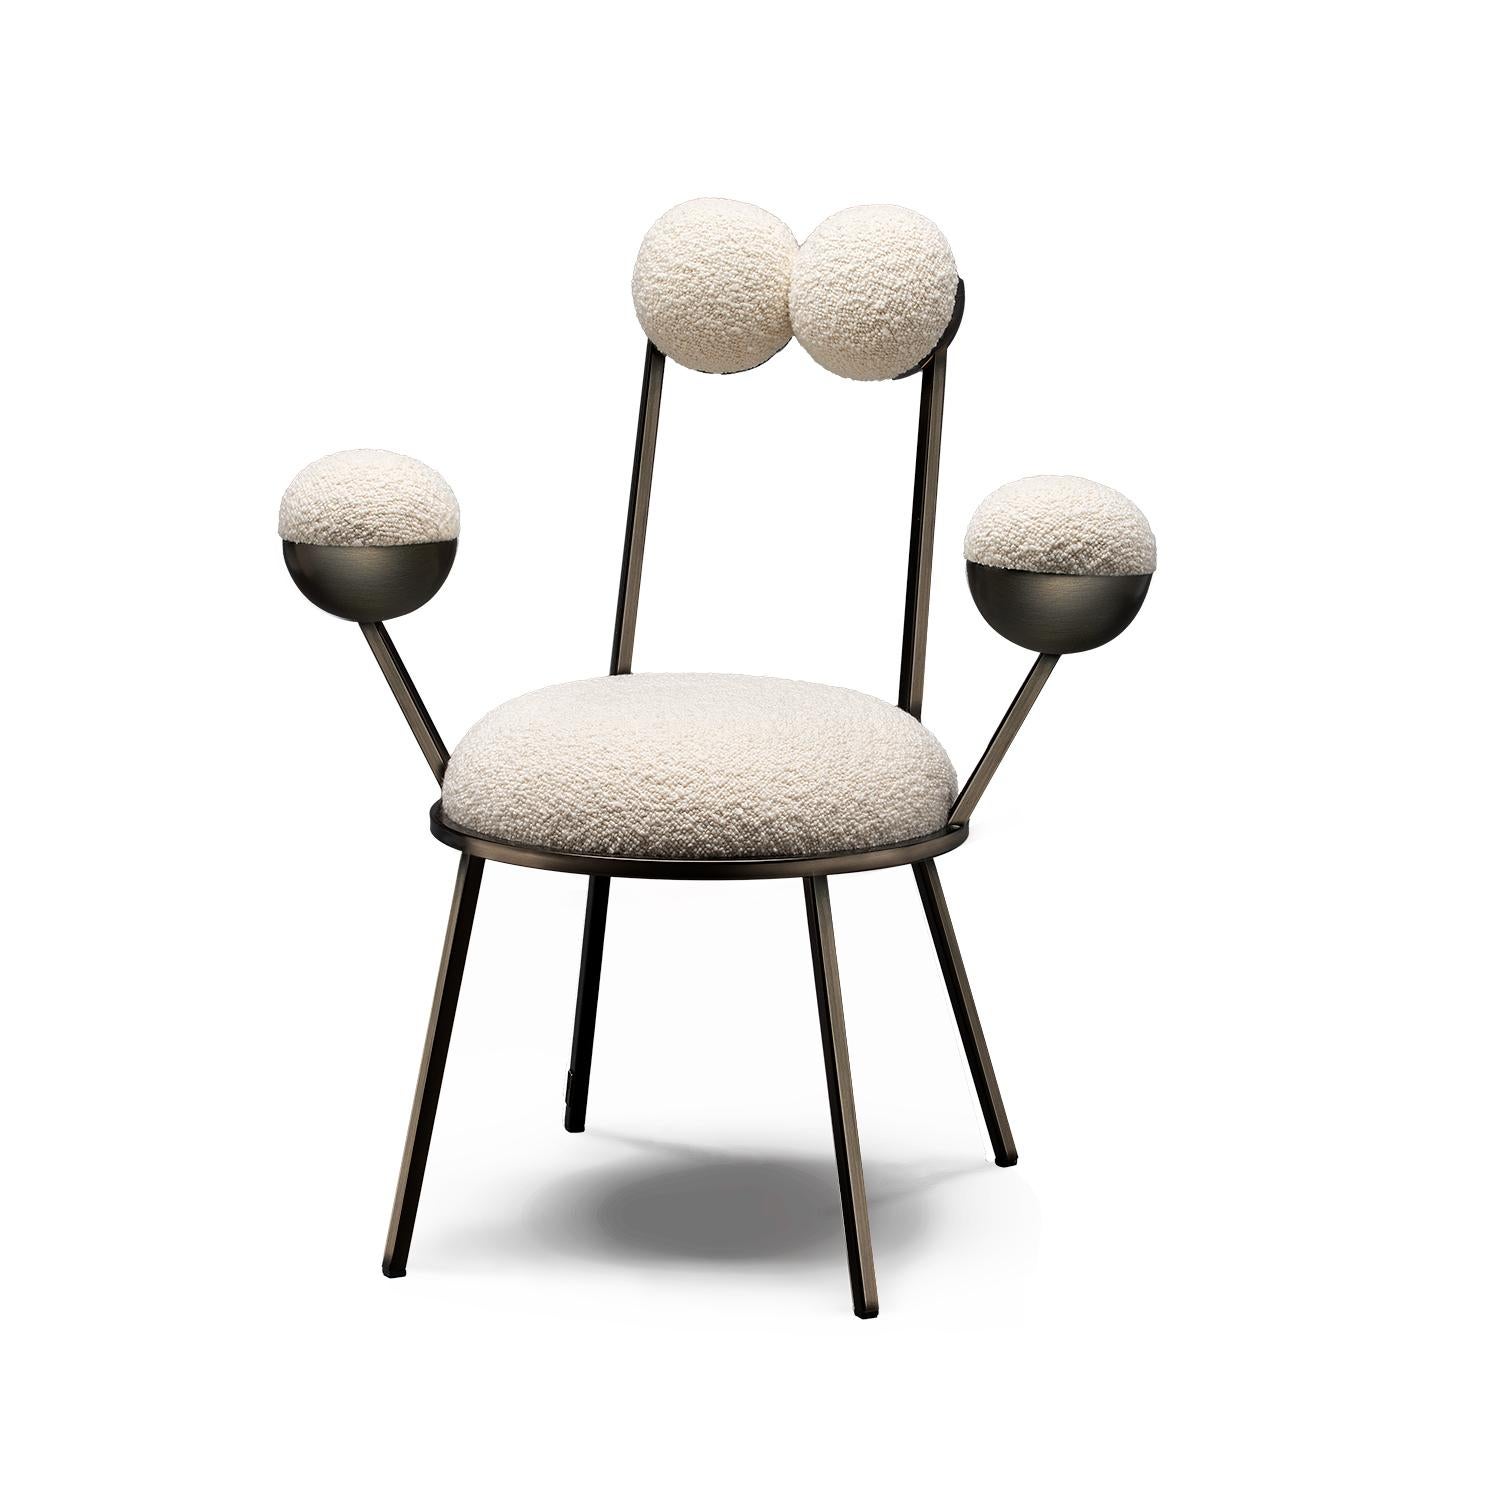 Trevor dining chair makes a perfect accompaniment for the tea room, its round spheres forming backrest and armrests, floating on thin metal rods, just like bonbons speared on cocktail sticks. Almost frog-like in its appearance, the chairs take the